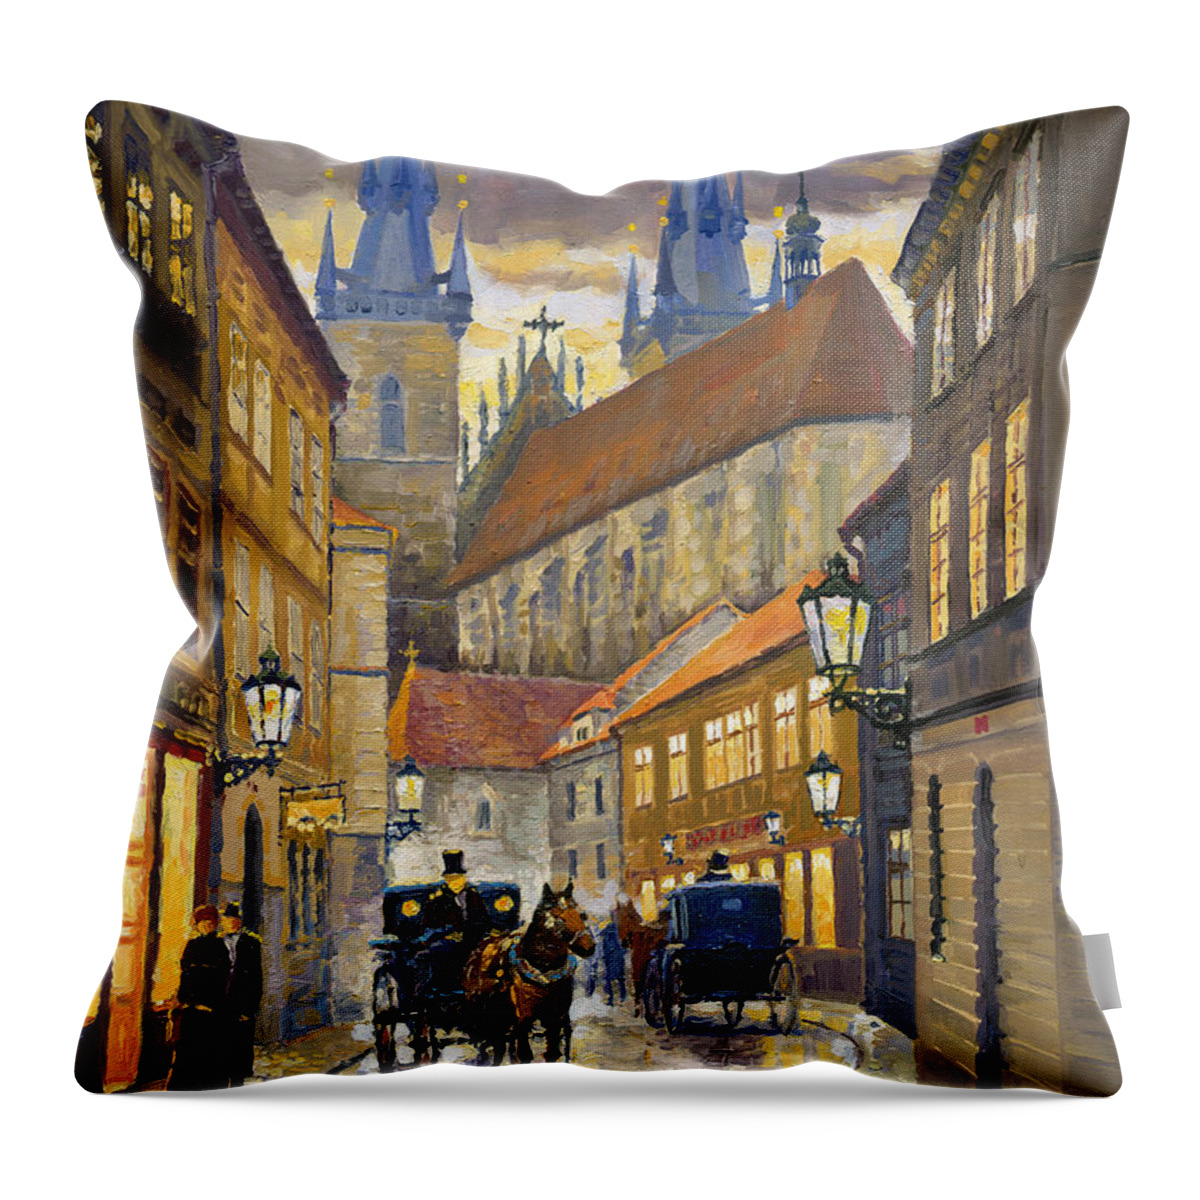 Oil Throw Pillow featuring the painting Prague Old Street Stupartska by Yuriy Shevchuk